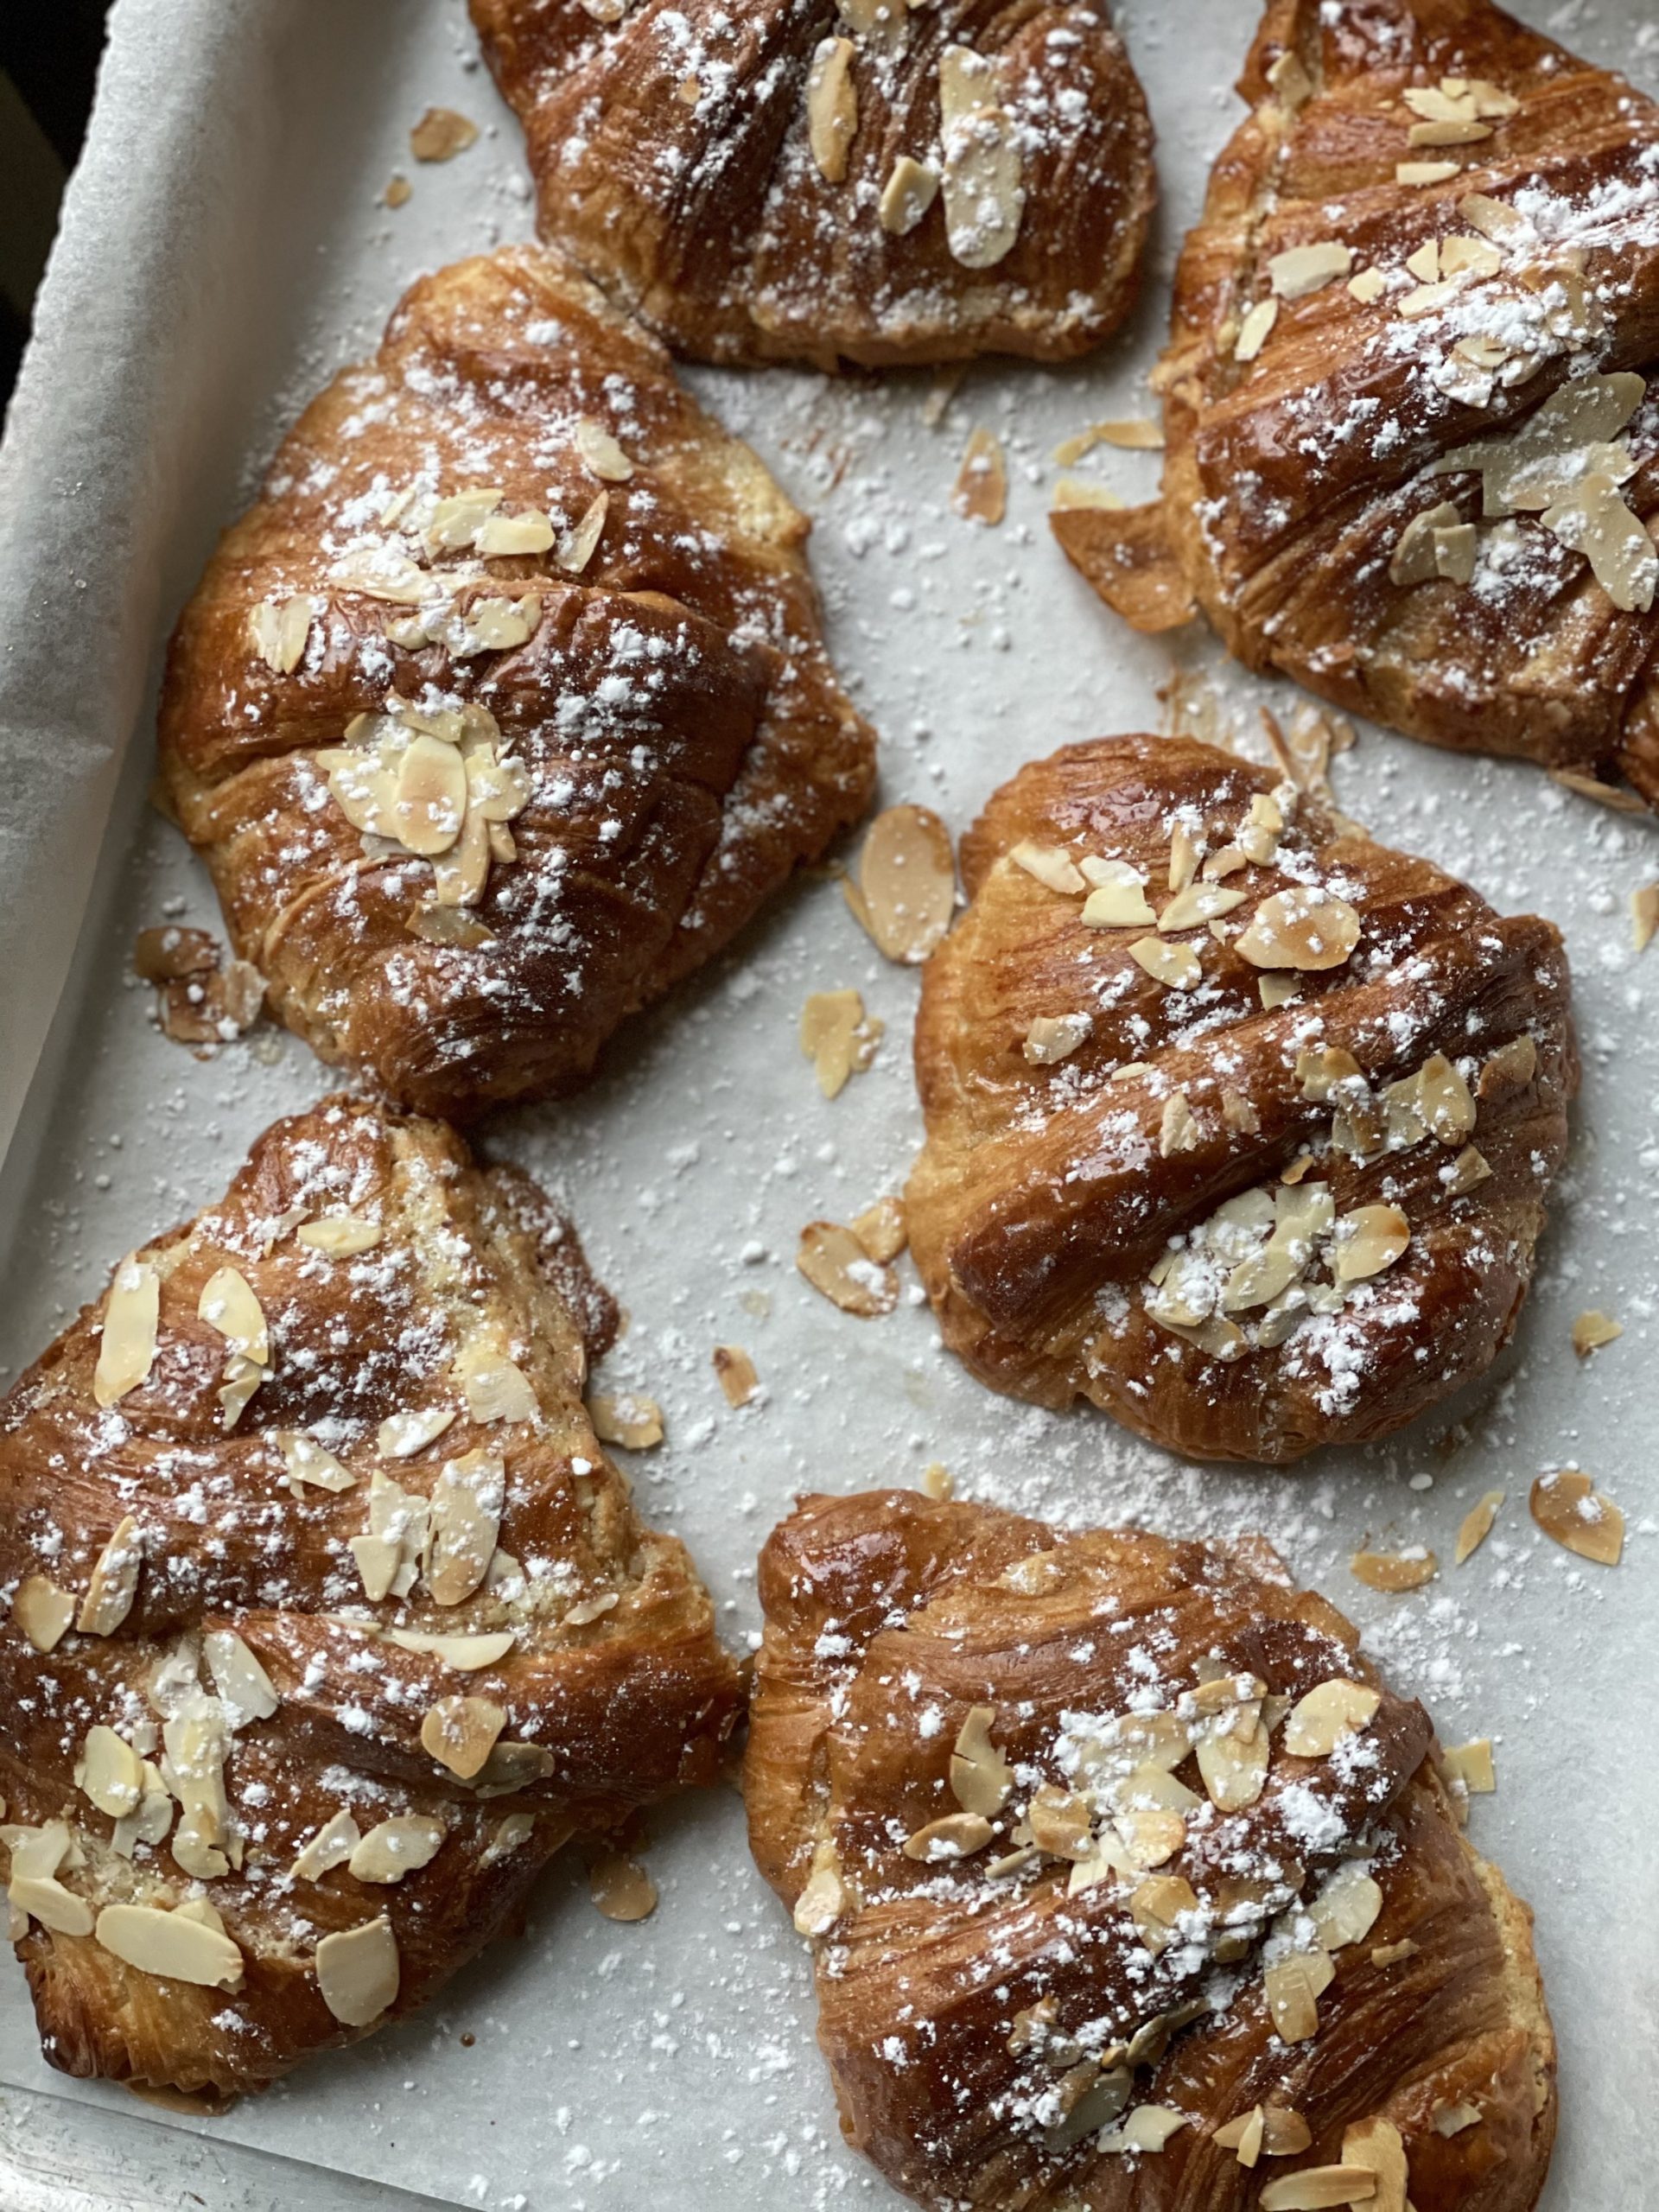 Freshly baked almond croissants topped with flaked almonds and icing sugarped with falkes